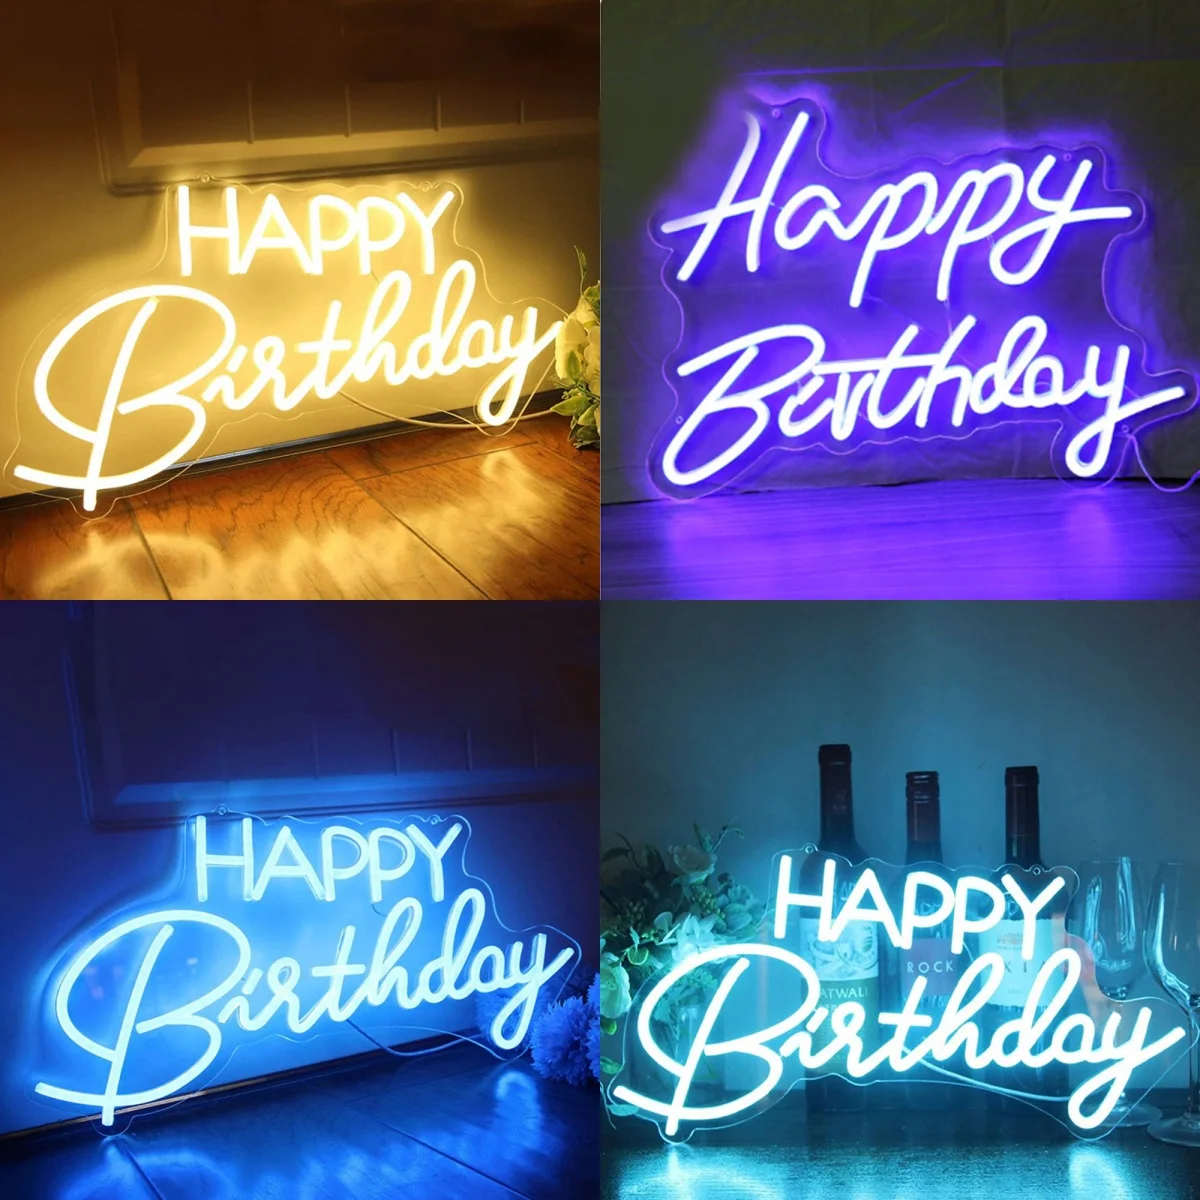 

Happy Birthday Led Neon Light Transparent Acrylic Glow Happy Birthday Neon Sign for Wedding Party Wall Hang Decorate Gift